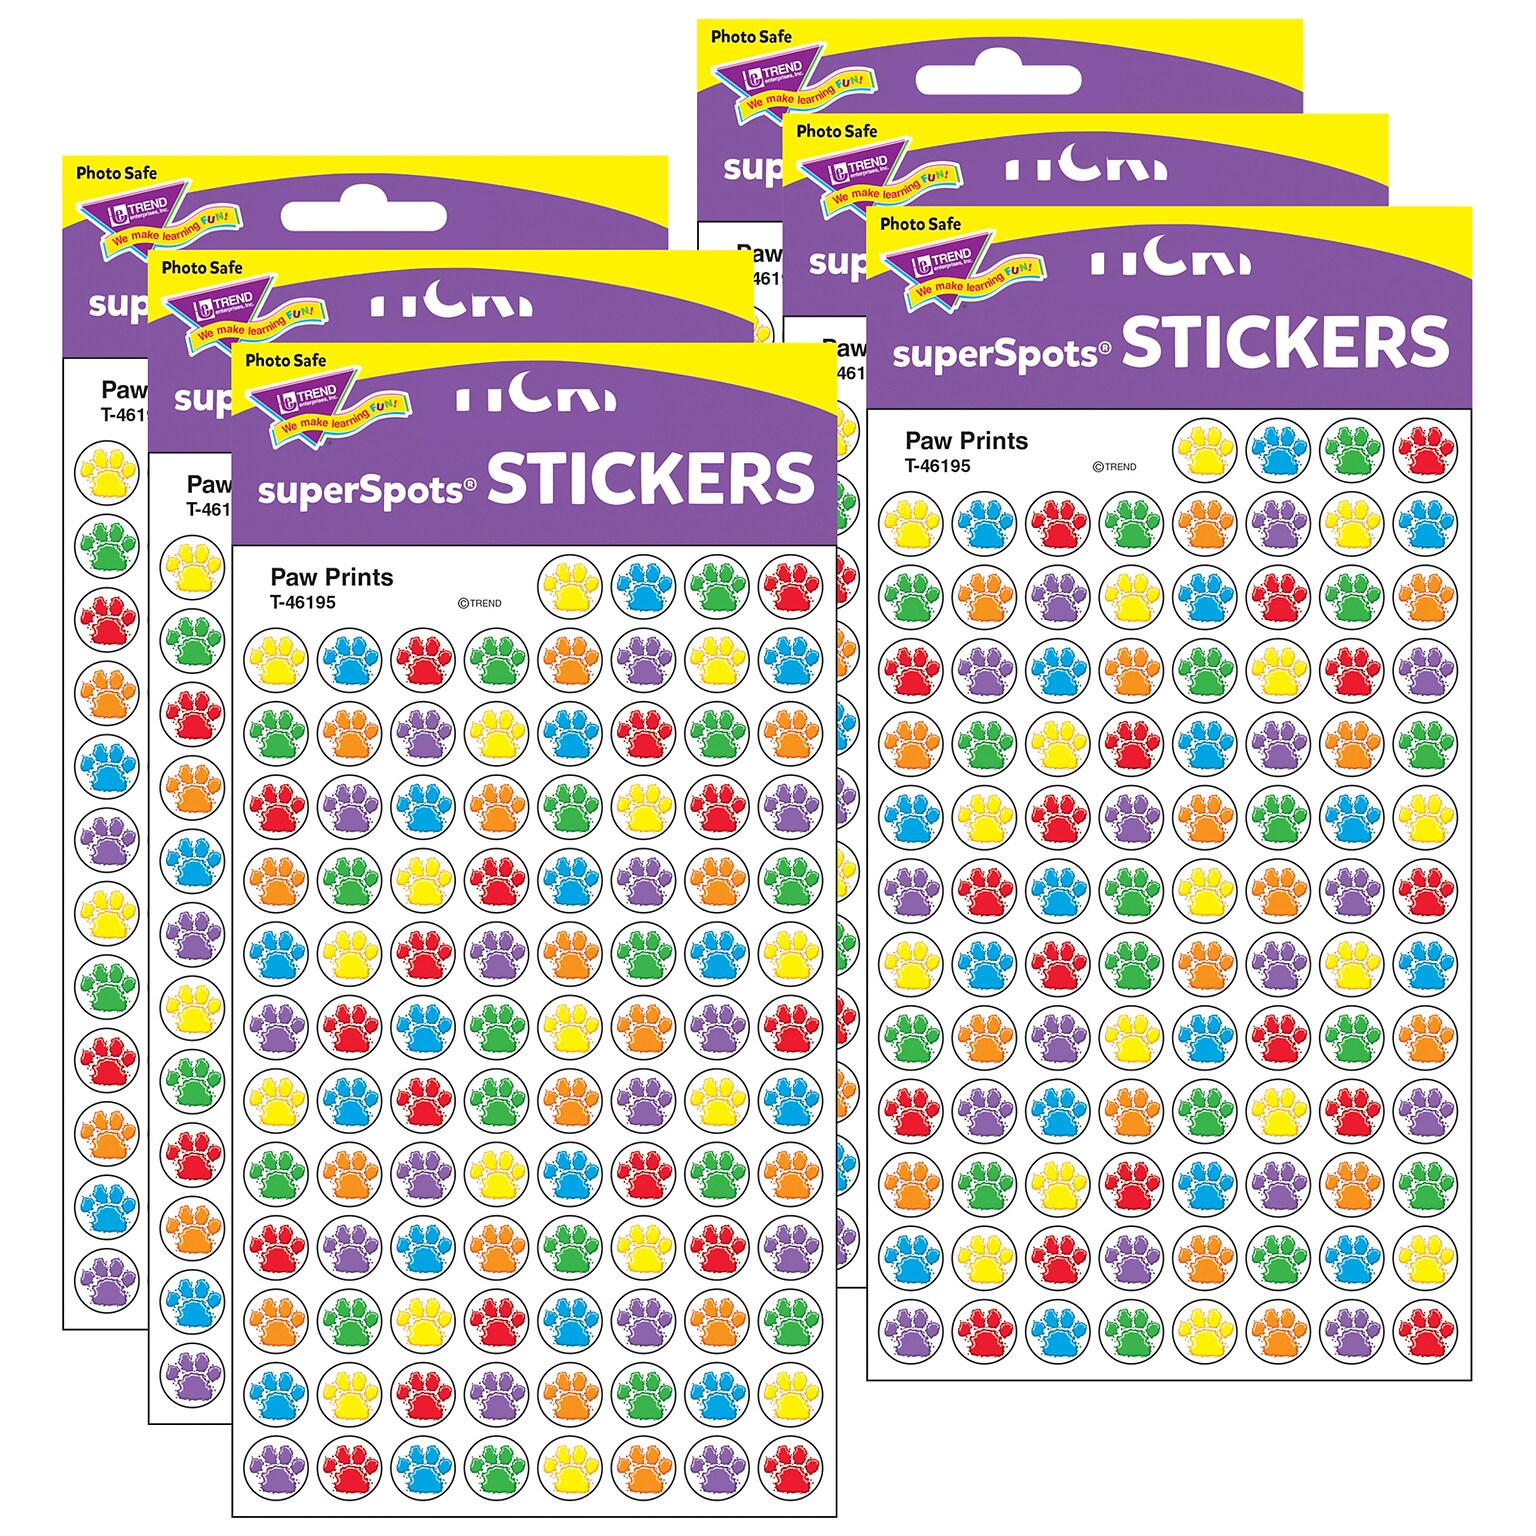 TREND Paw Prints superSpots Stickers, 800 Per Pack, 6 Packs (T-46195-6)